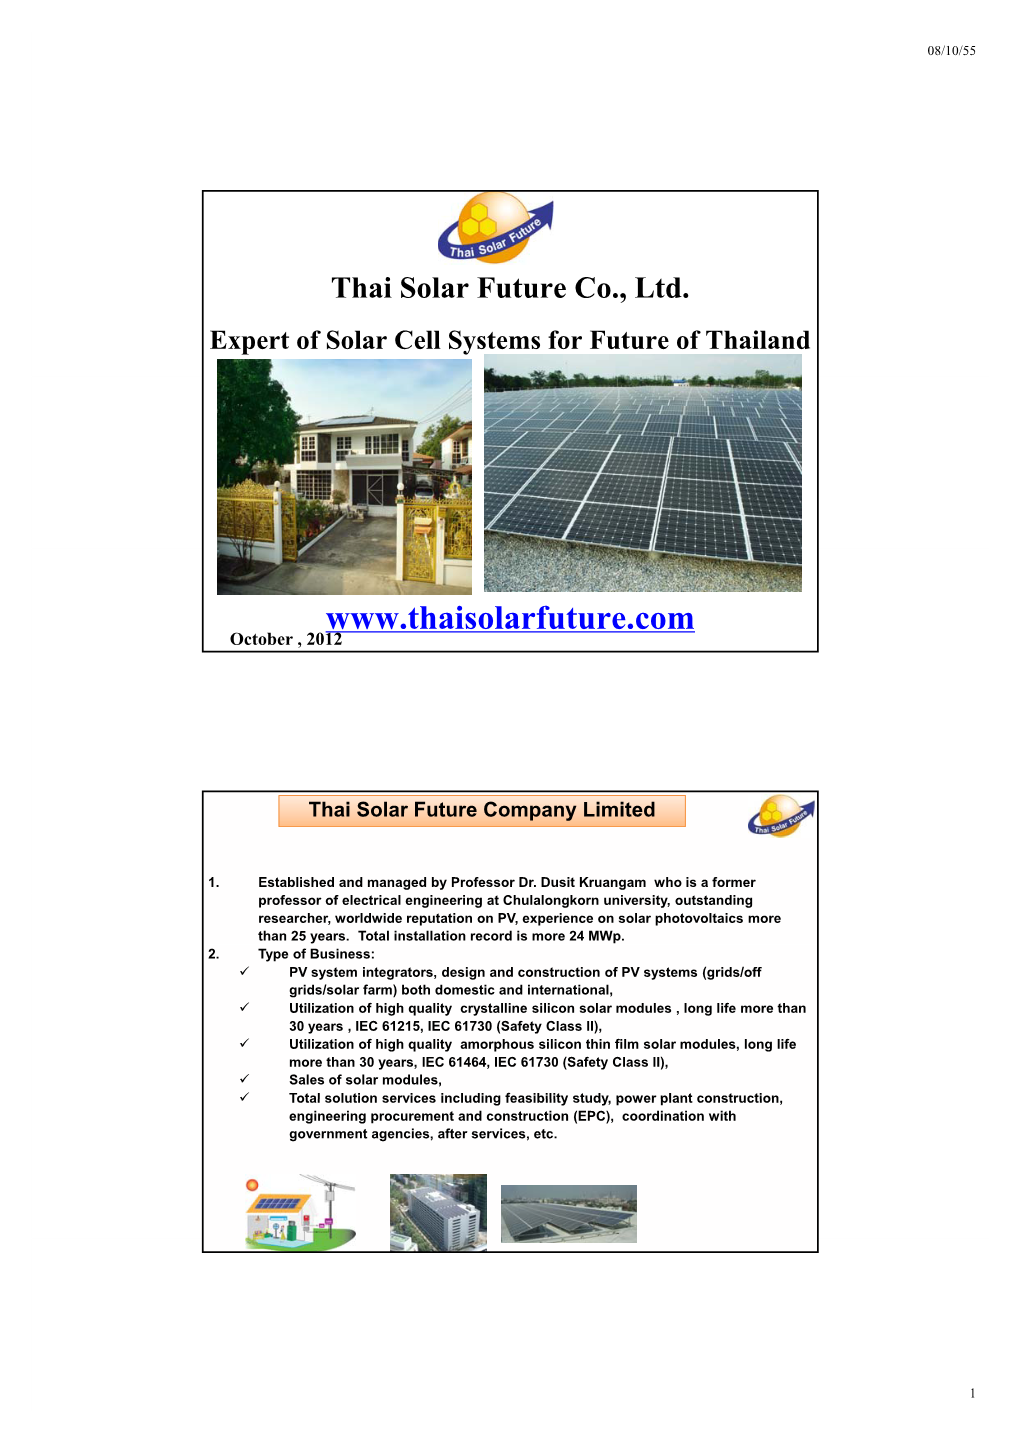 Thai Solar Future Co., Ltd. Expert of Solar Cell Systems for Future of Thailand